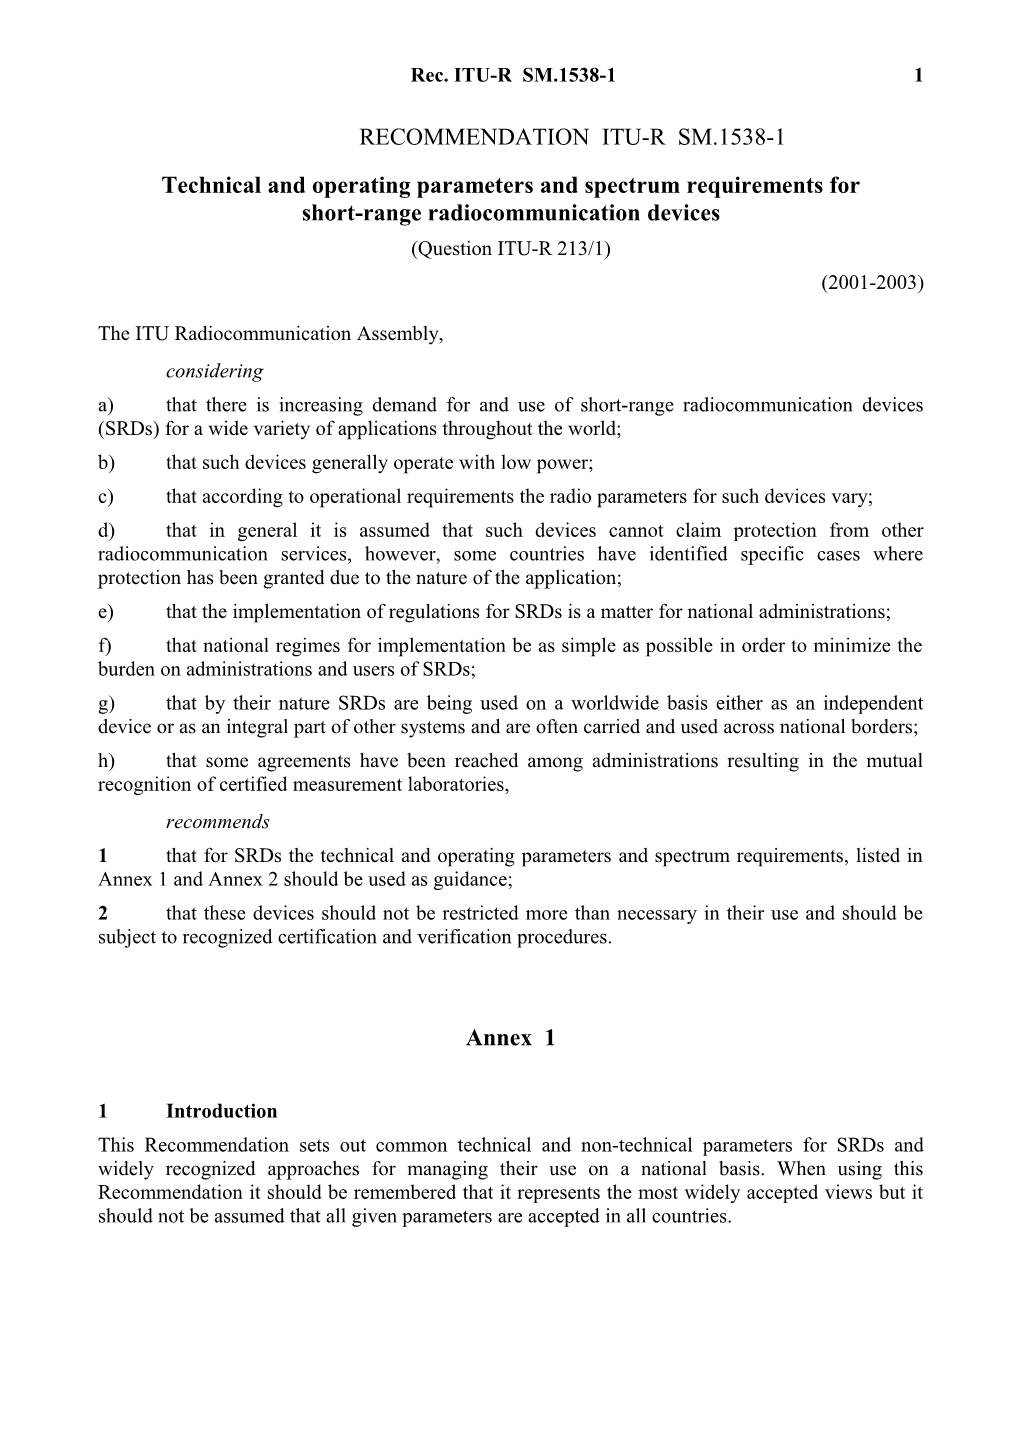 RECOMMENDATION ITU-R SM.1538-1 - Technical and Operating Parameters and Spectrum Requirements